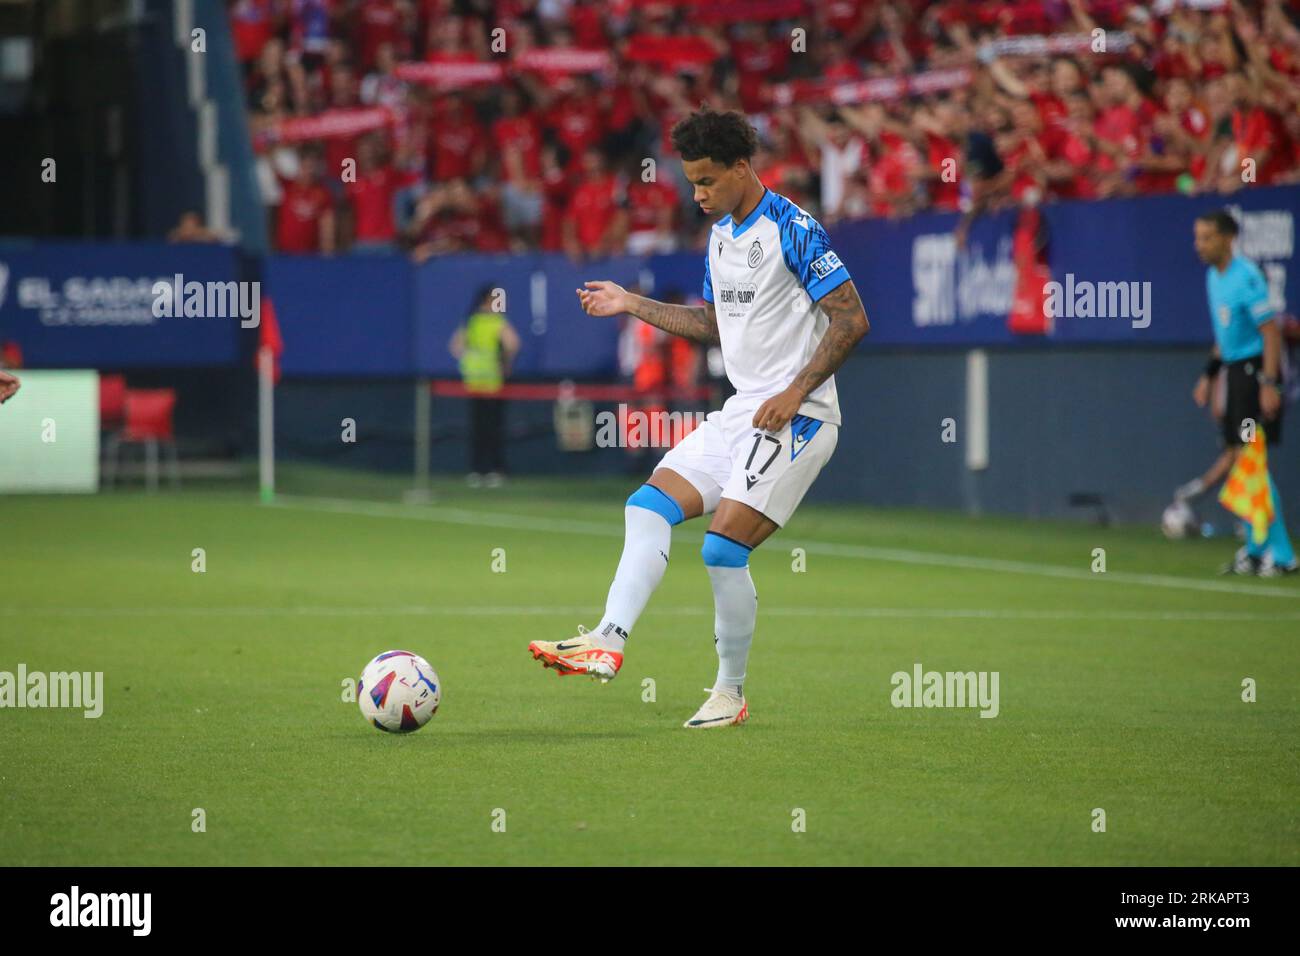 Pamplona, Spain, 24th August, 2023: Club Brugge's player Tajon Buchanan (17) passes the ball during the first leg match of the UEFA Europa Conference League 2023-24 Preliminary Round between CA Osasuna and Club Brugge in the El Sadar Stadium, in Pamplona, on August 24, 2023. Credit: Alberto Brevers / Alamy Live News. Stock Photo